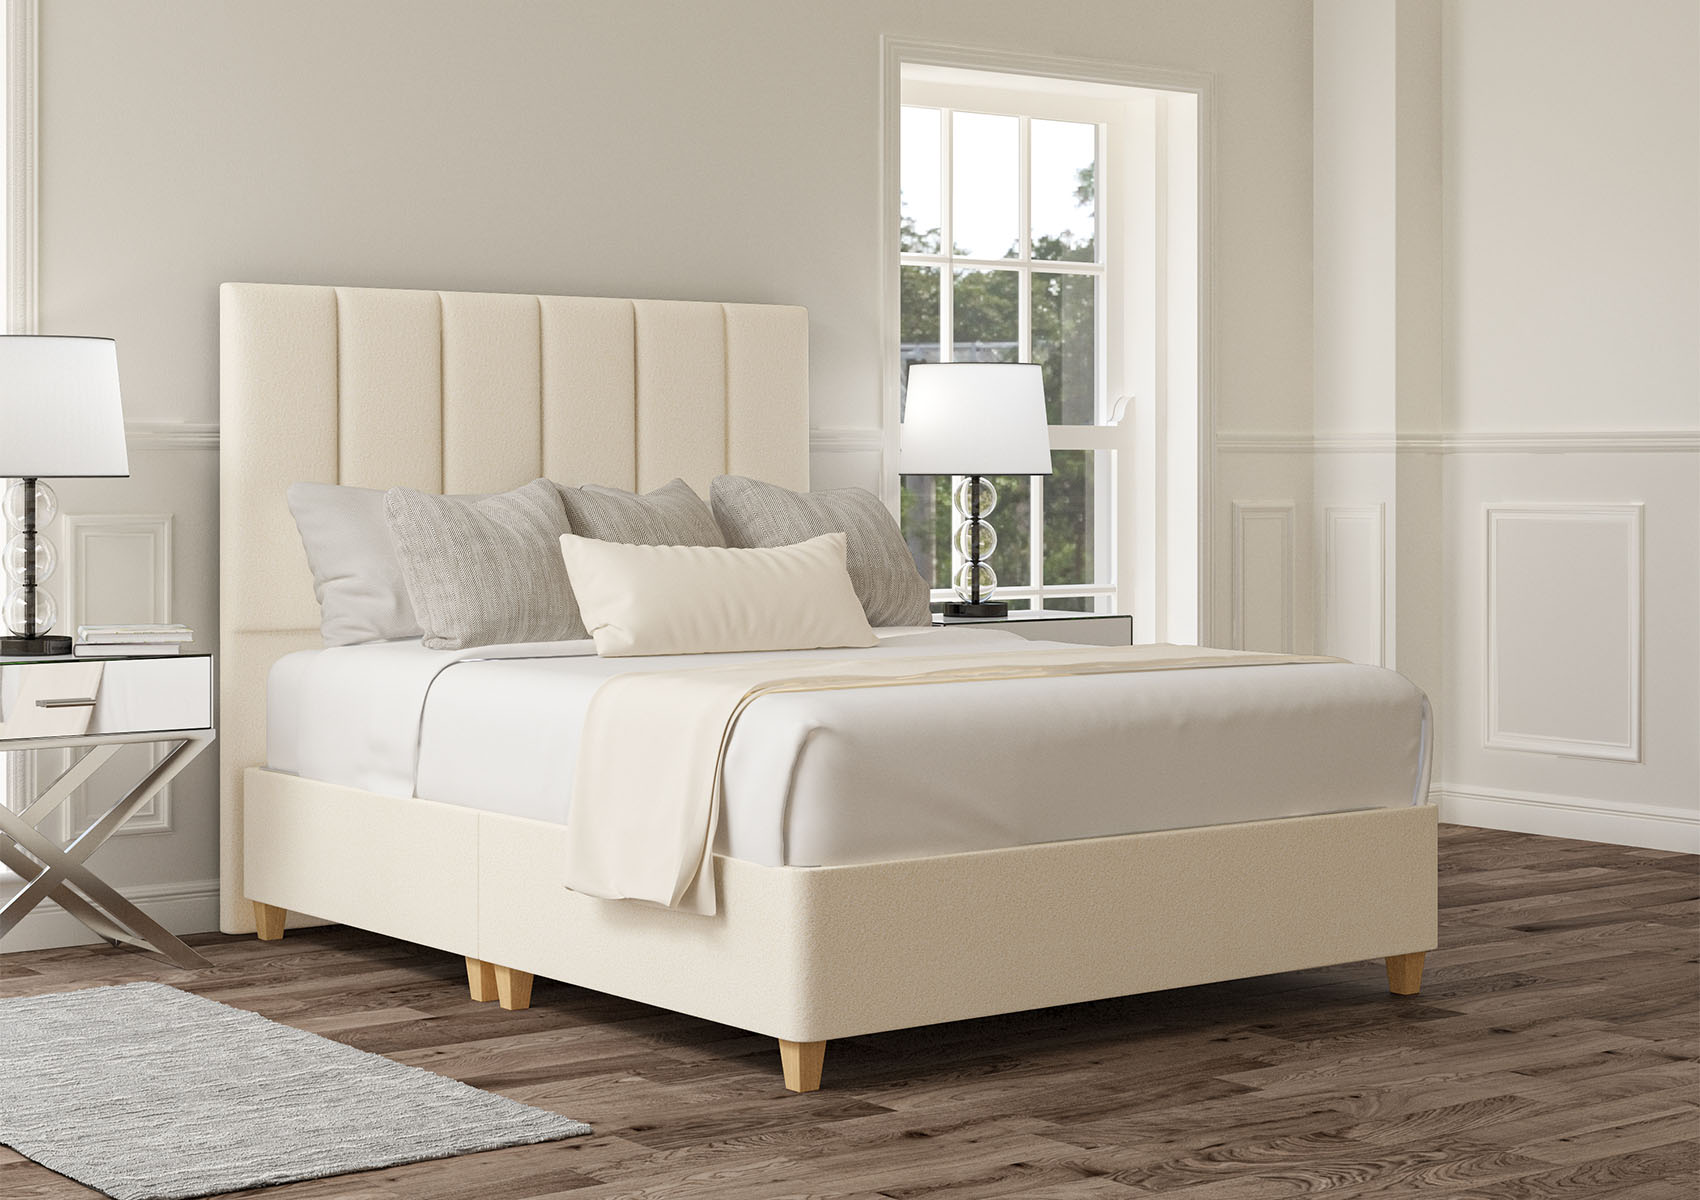 View Empire Teddy Cream Upholstered Single Divan Bed Time4Sleep information